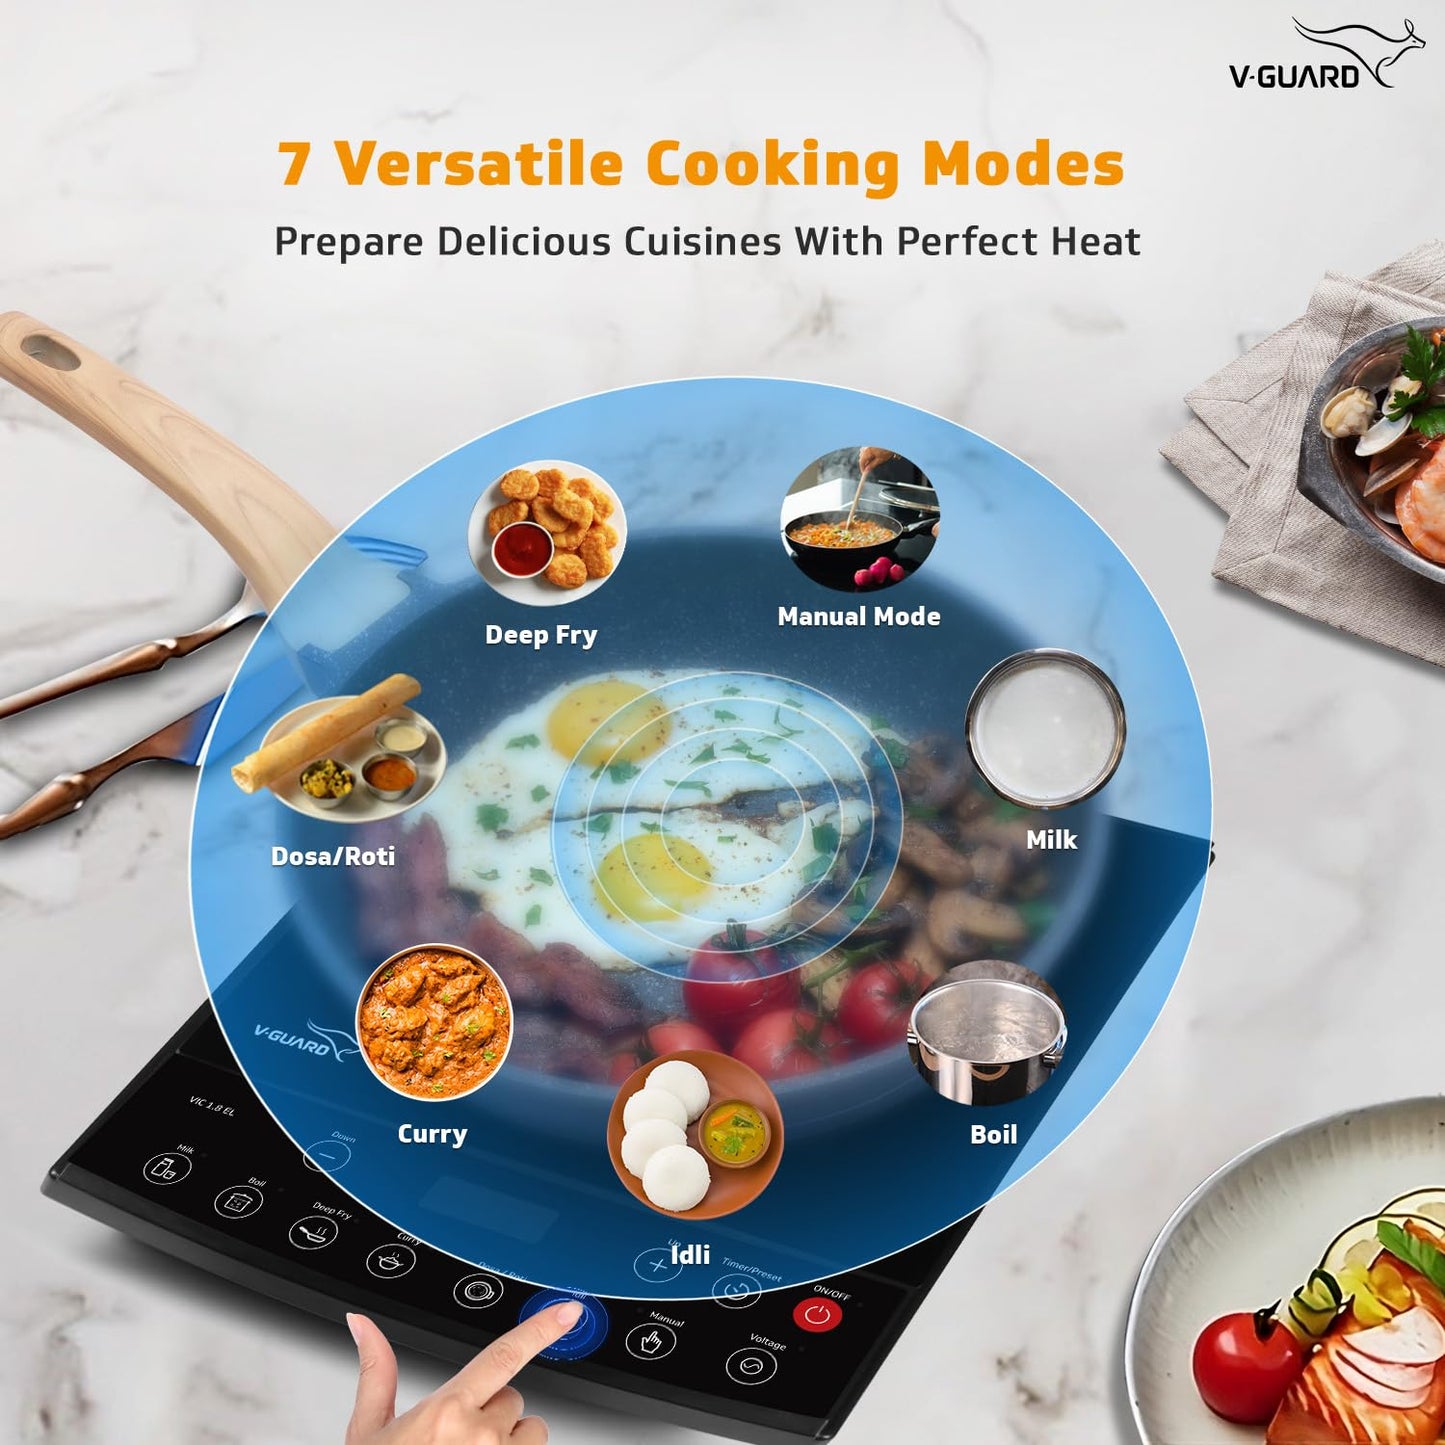 VIC 1.8 EL Induction Cooktop / 1800 Watt Electric Induction stove with 8 Power Levels |Temperature Control | Push button| Auto-cutoff | Elegant Crystal Glass Matte Finish | Fast Cooking